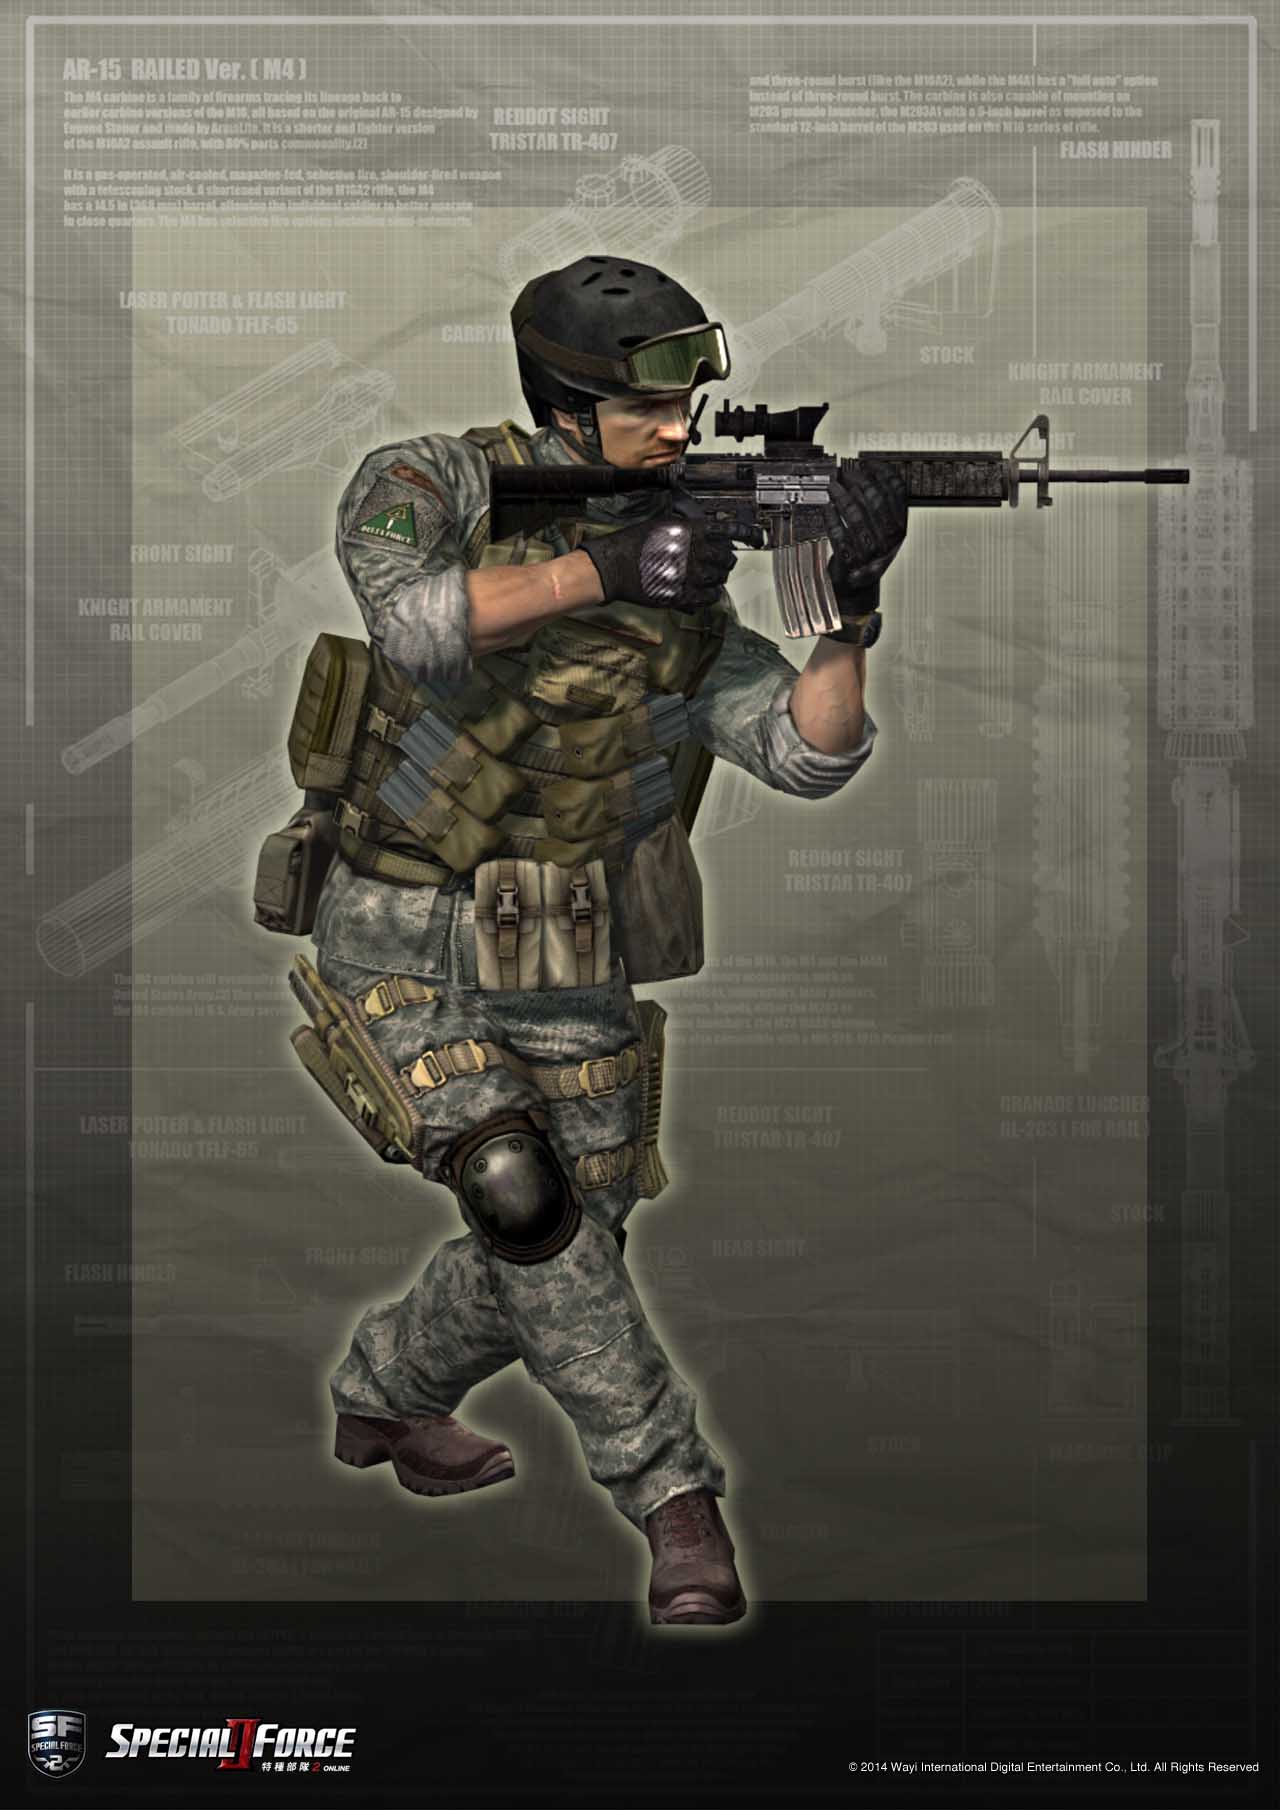 GAFE 02 Special Force 2 by michaelxgamingph on DeviantArt